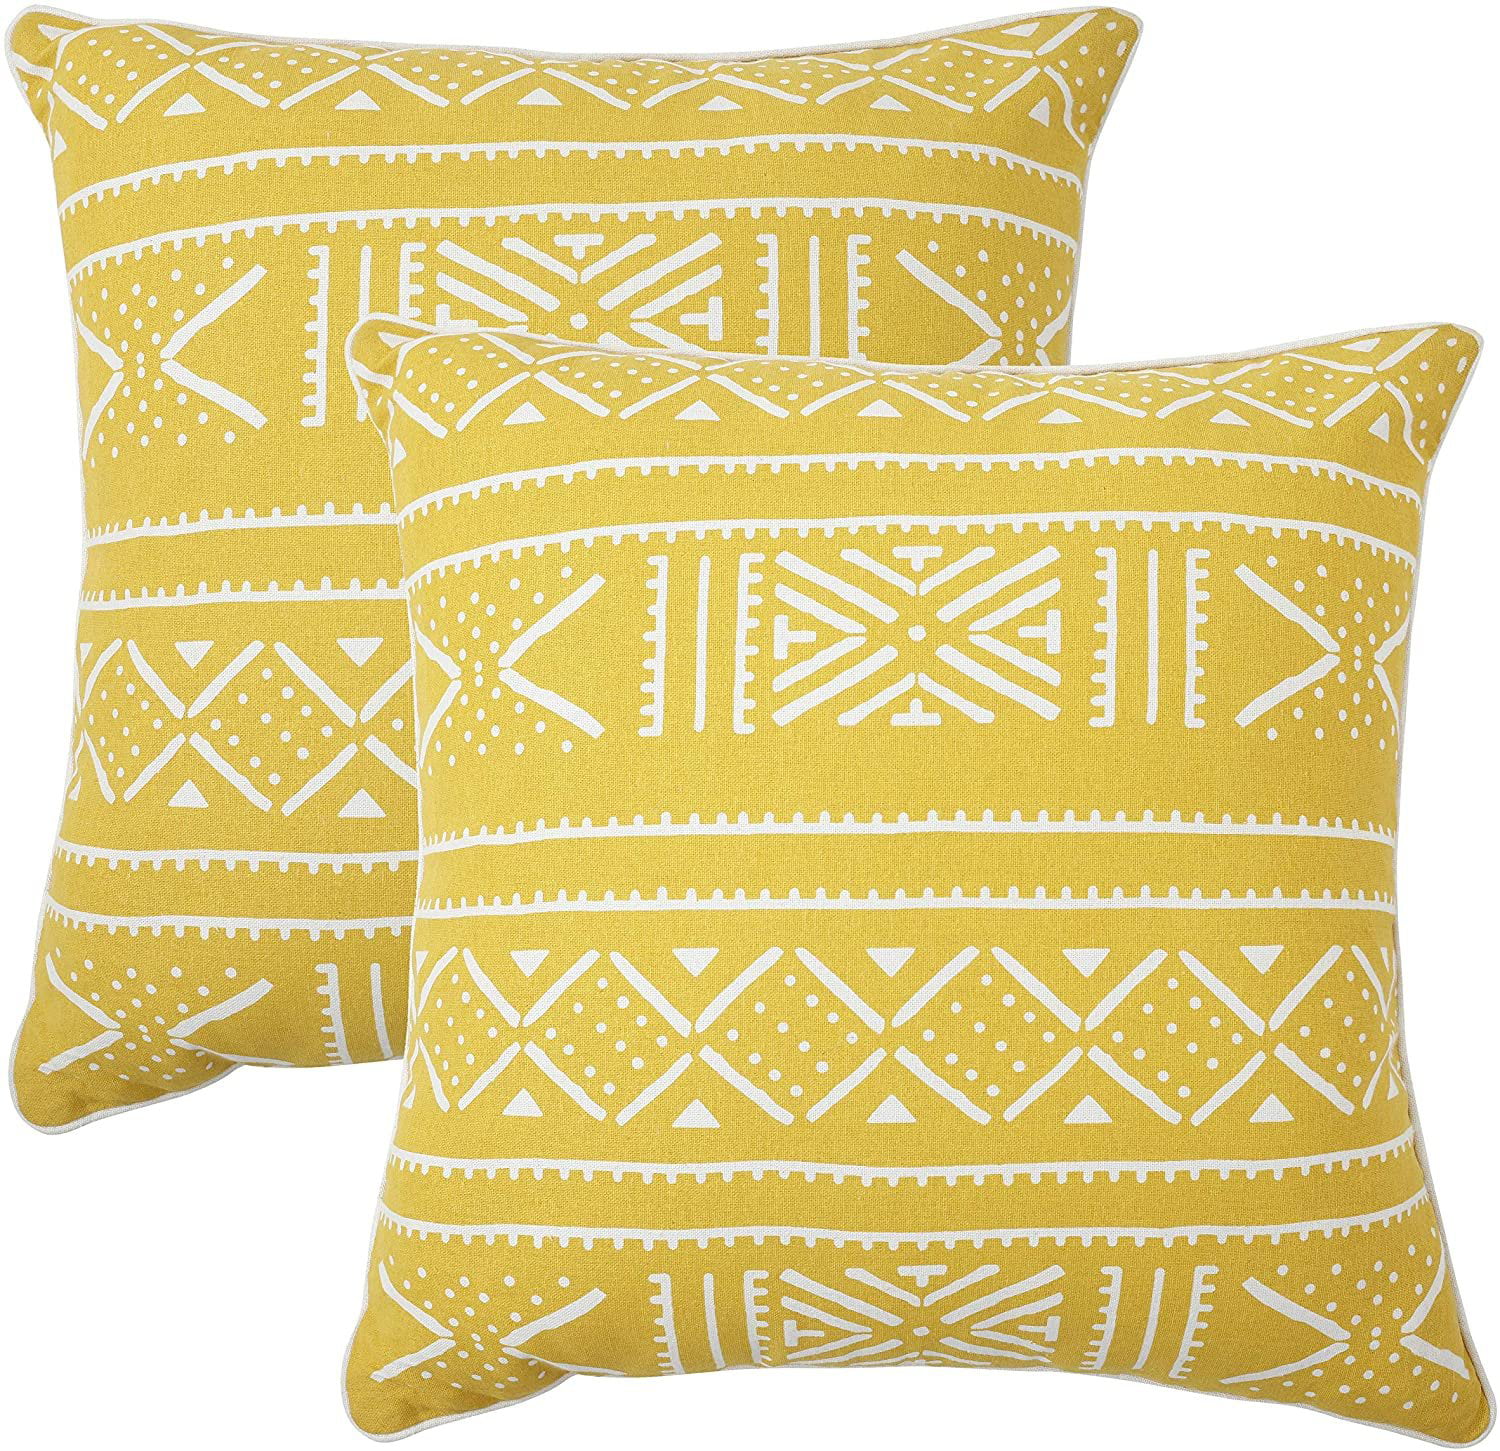 car; 100% Cotton Pack of 2 18x18; Mustard REDEARTH Printed Throw Pillow Cushion Covers-Woven Decorative Farmhouse Cases Set for Couch Bed Sofa Outdoor Patio Dining Chair